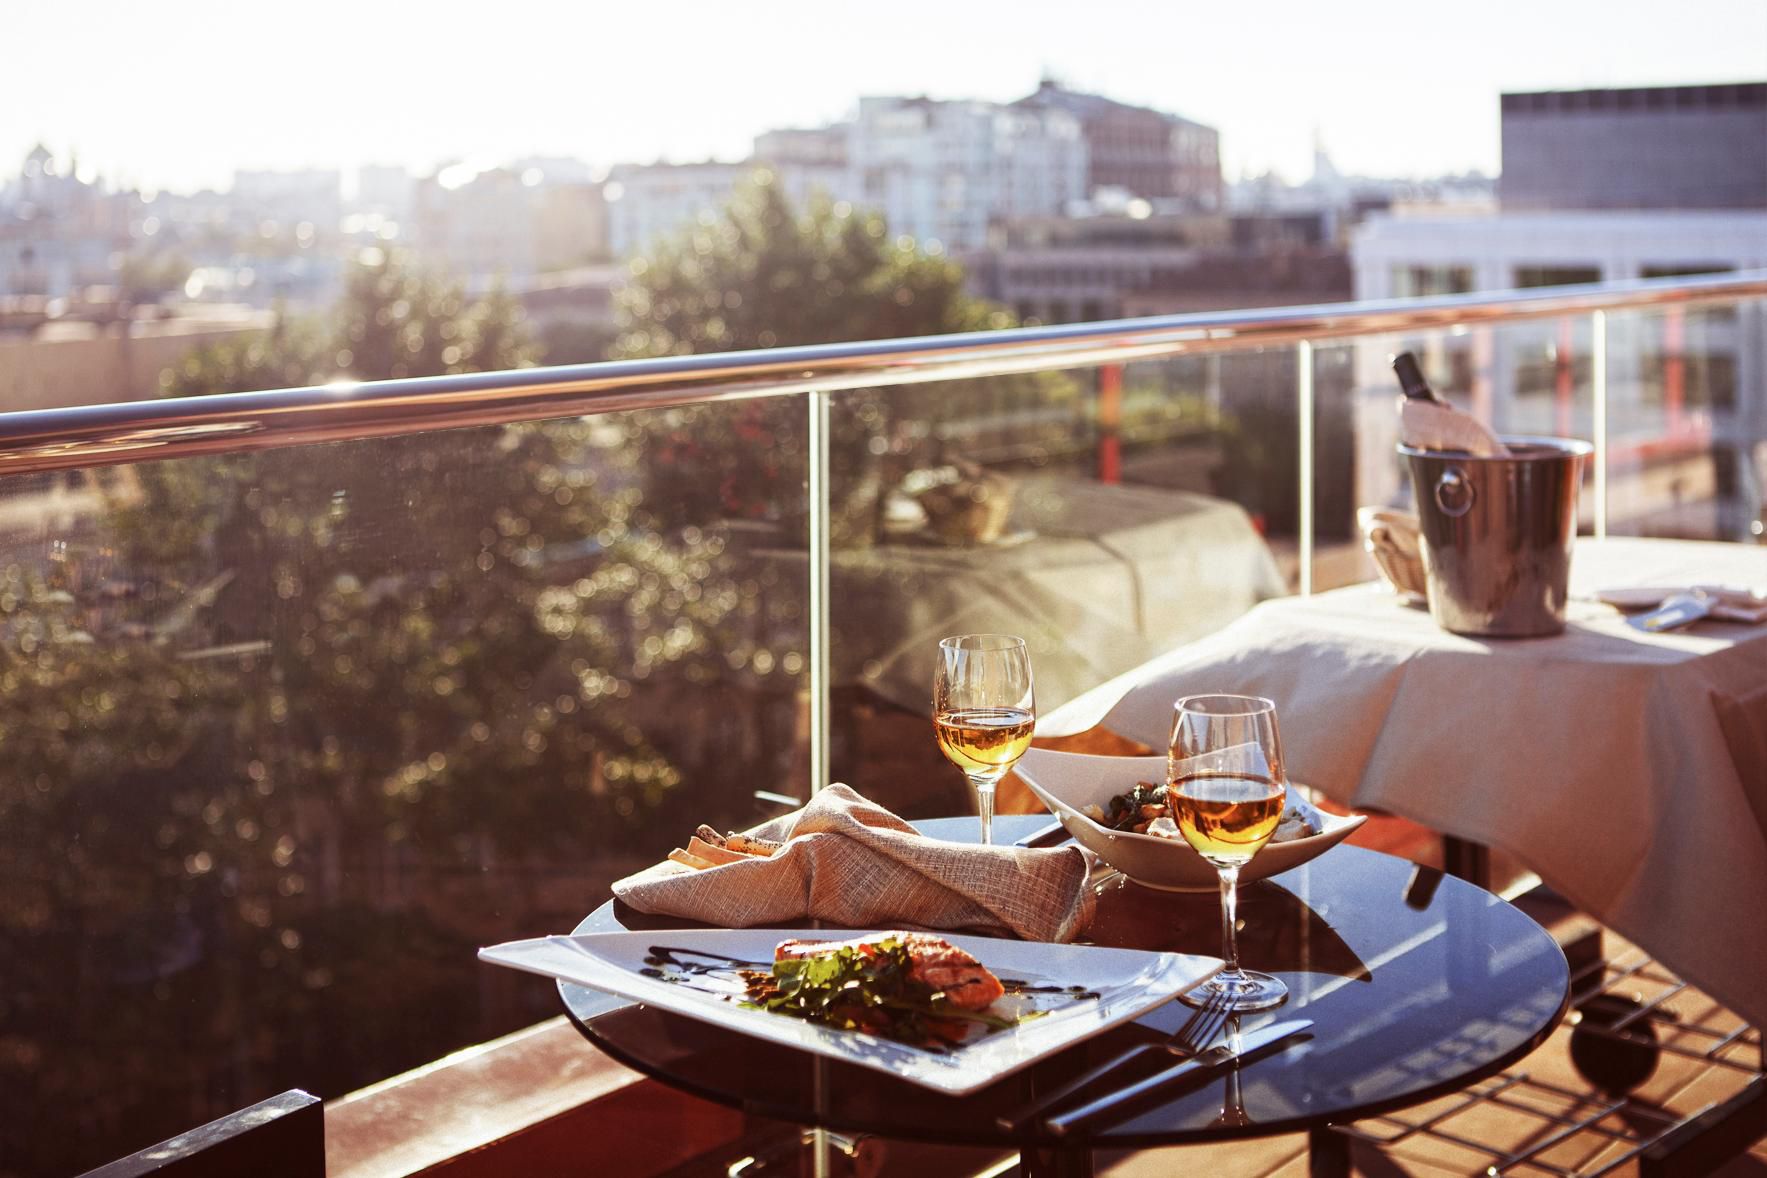 Have an incredible dinner on your private balcony.